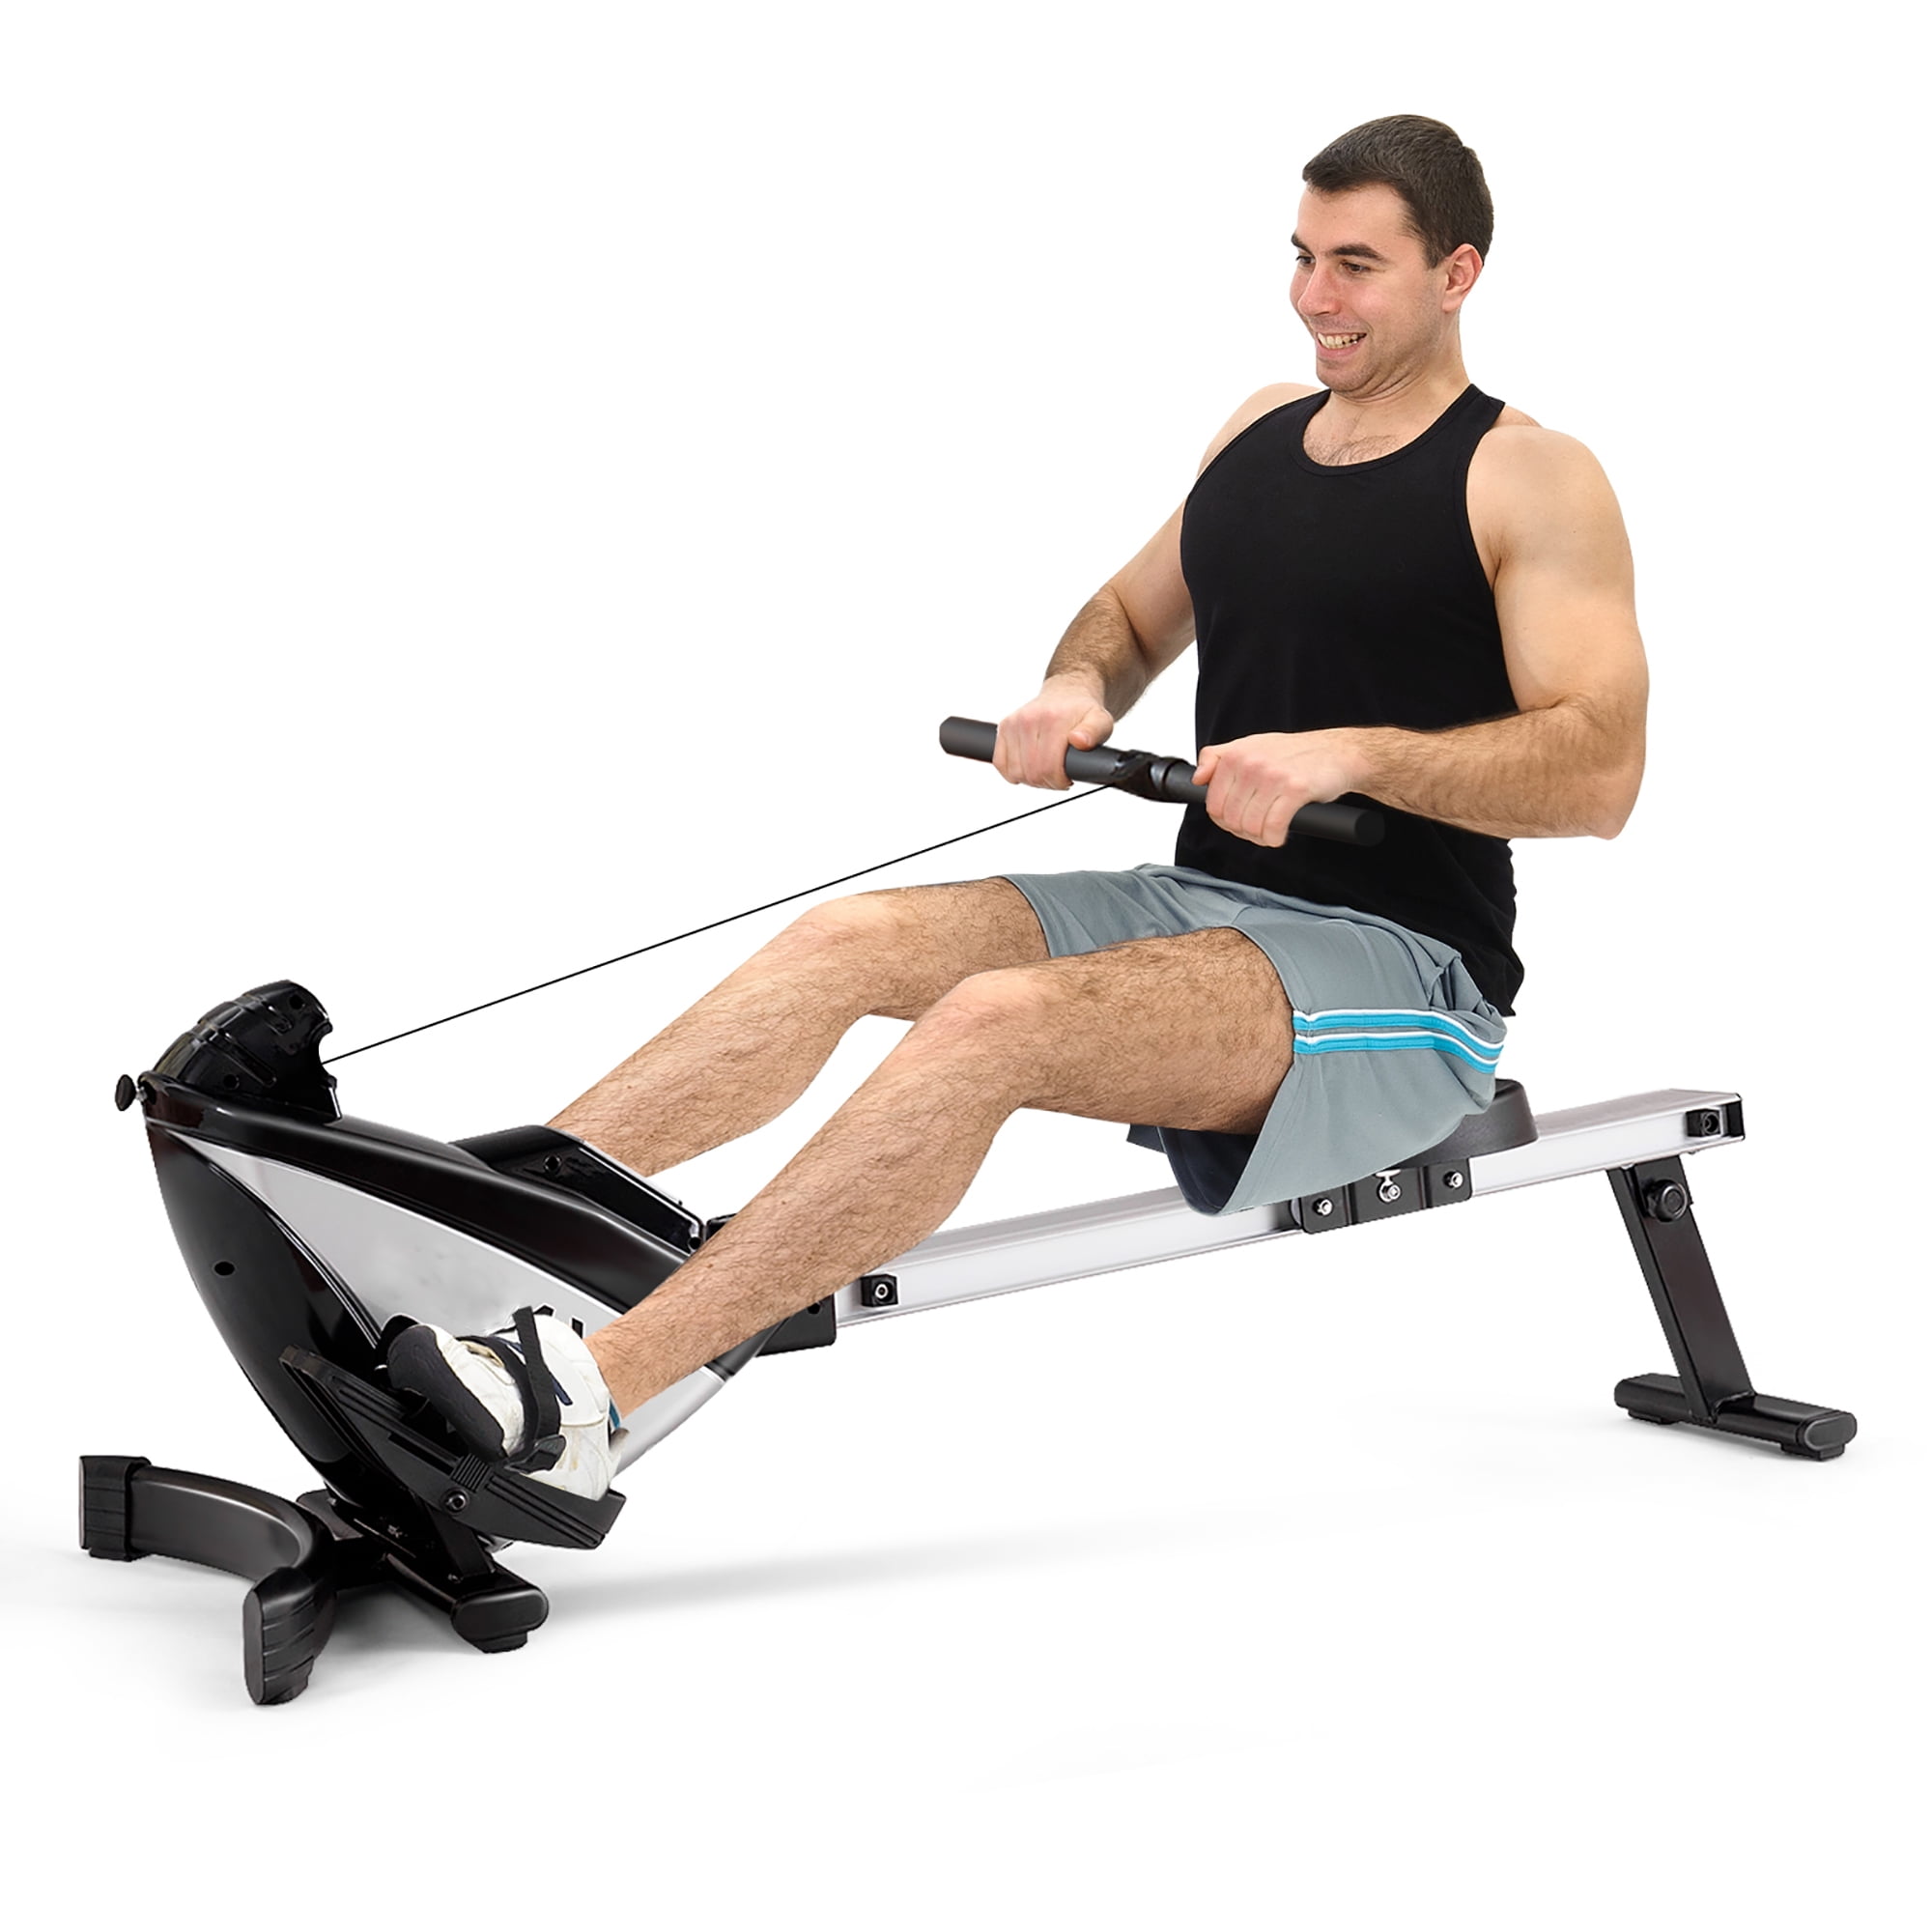 VILOBOS Rowing Machine 12 Resistance Levels Home Gym Cardio Exercise Workout LCD 